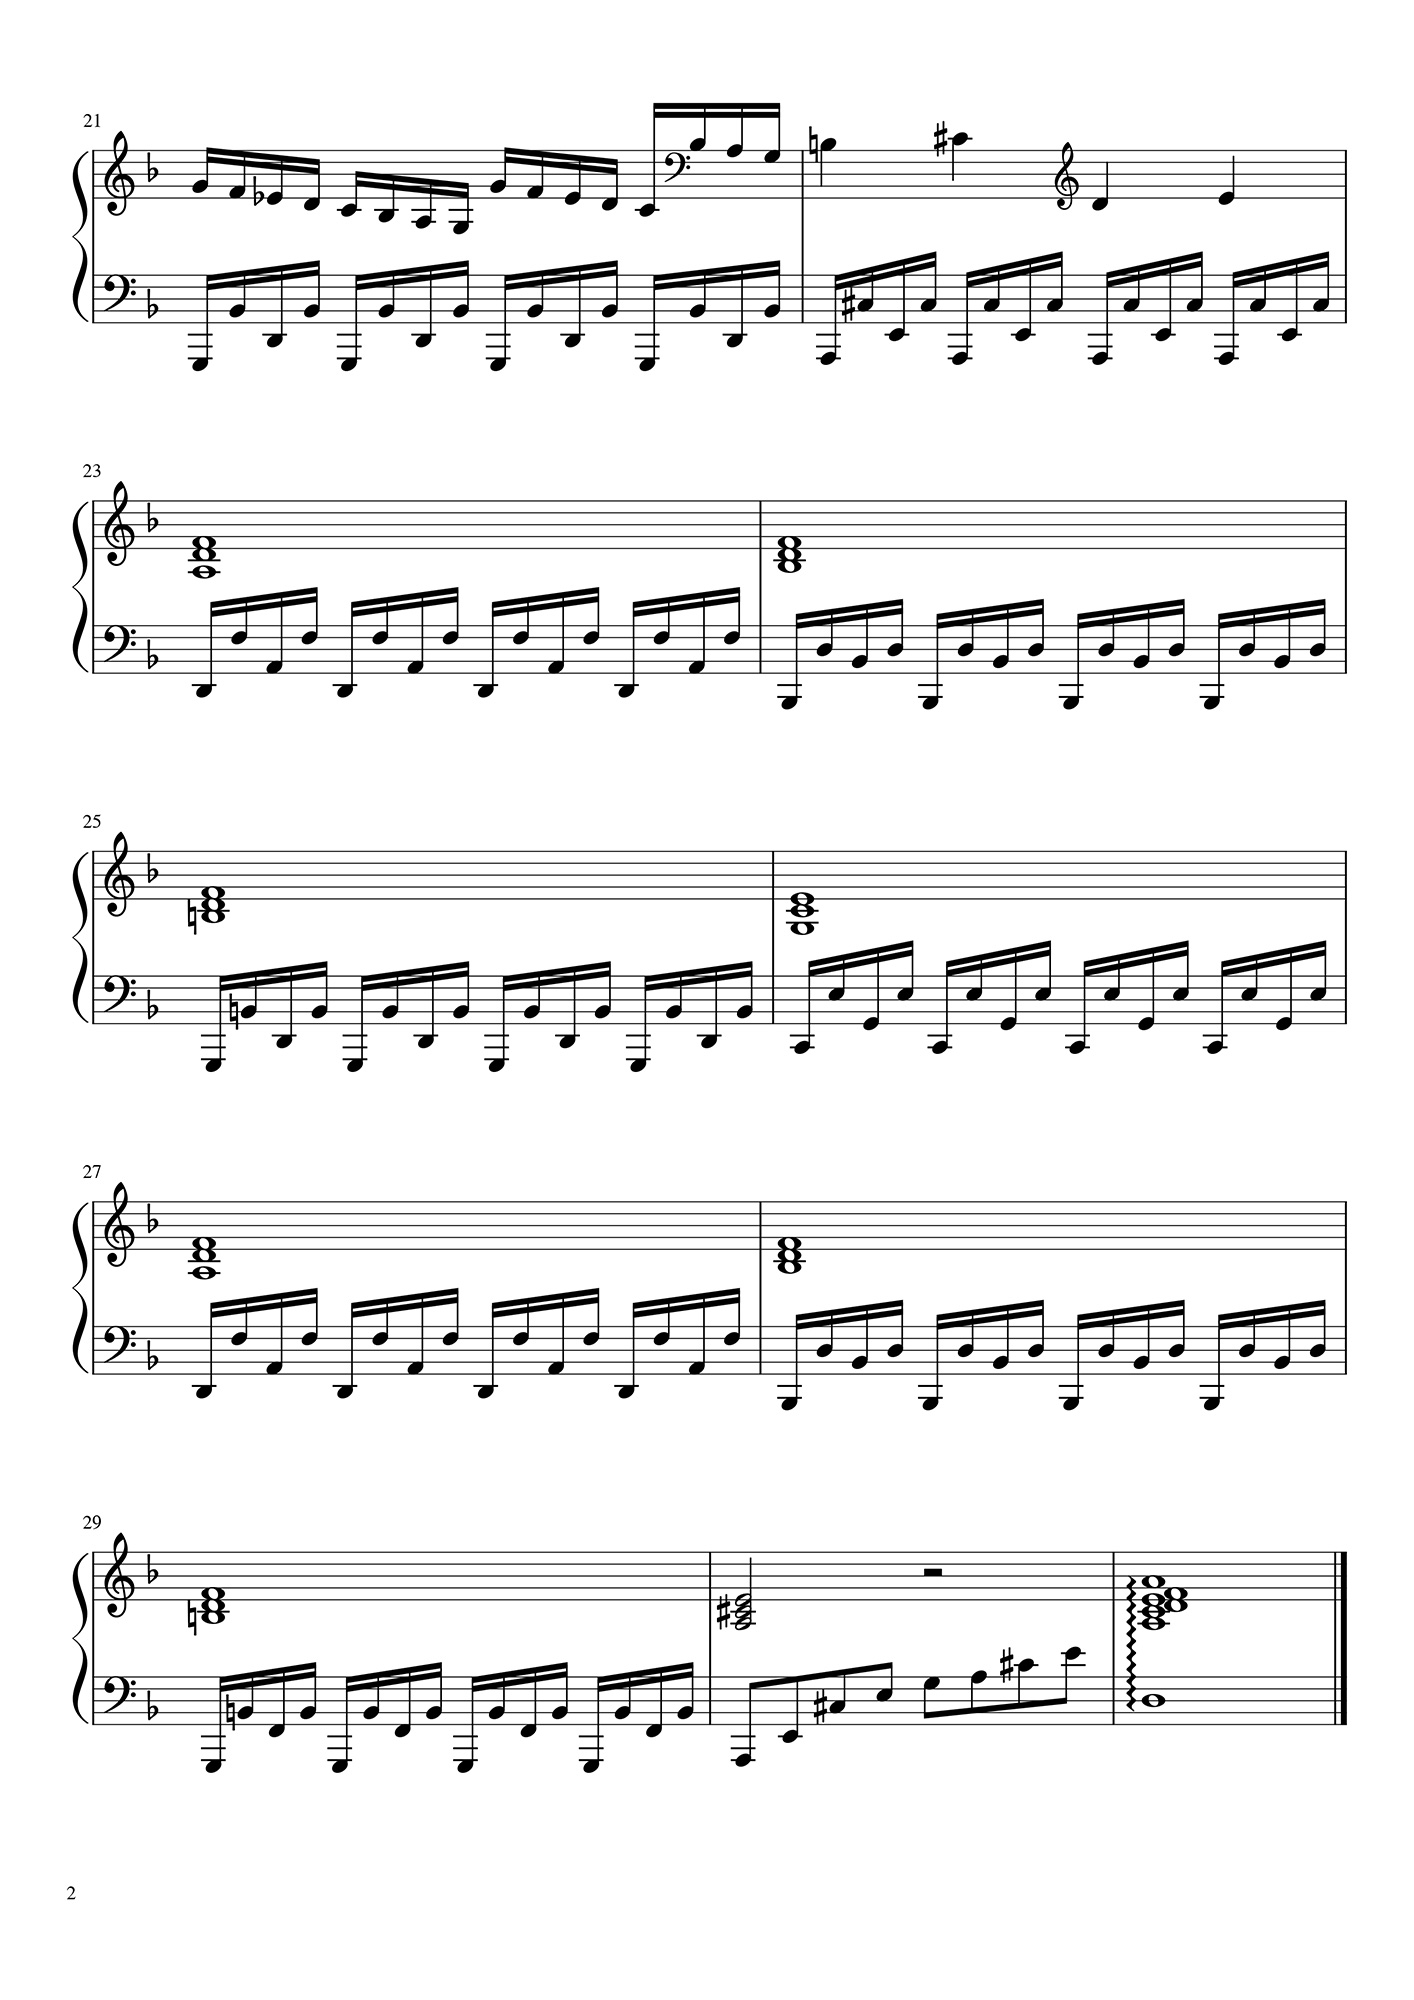 An image of musical notes and score for an instrumental improvisation.